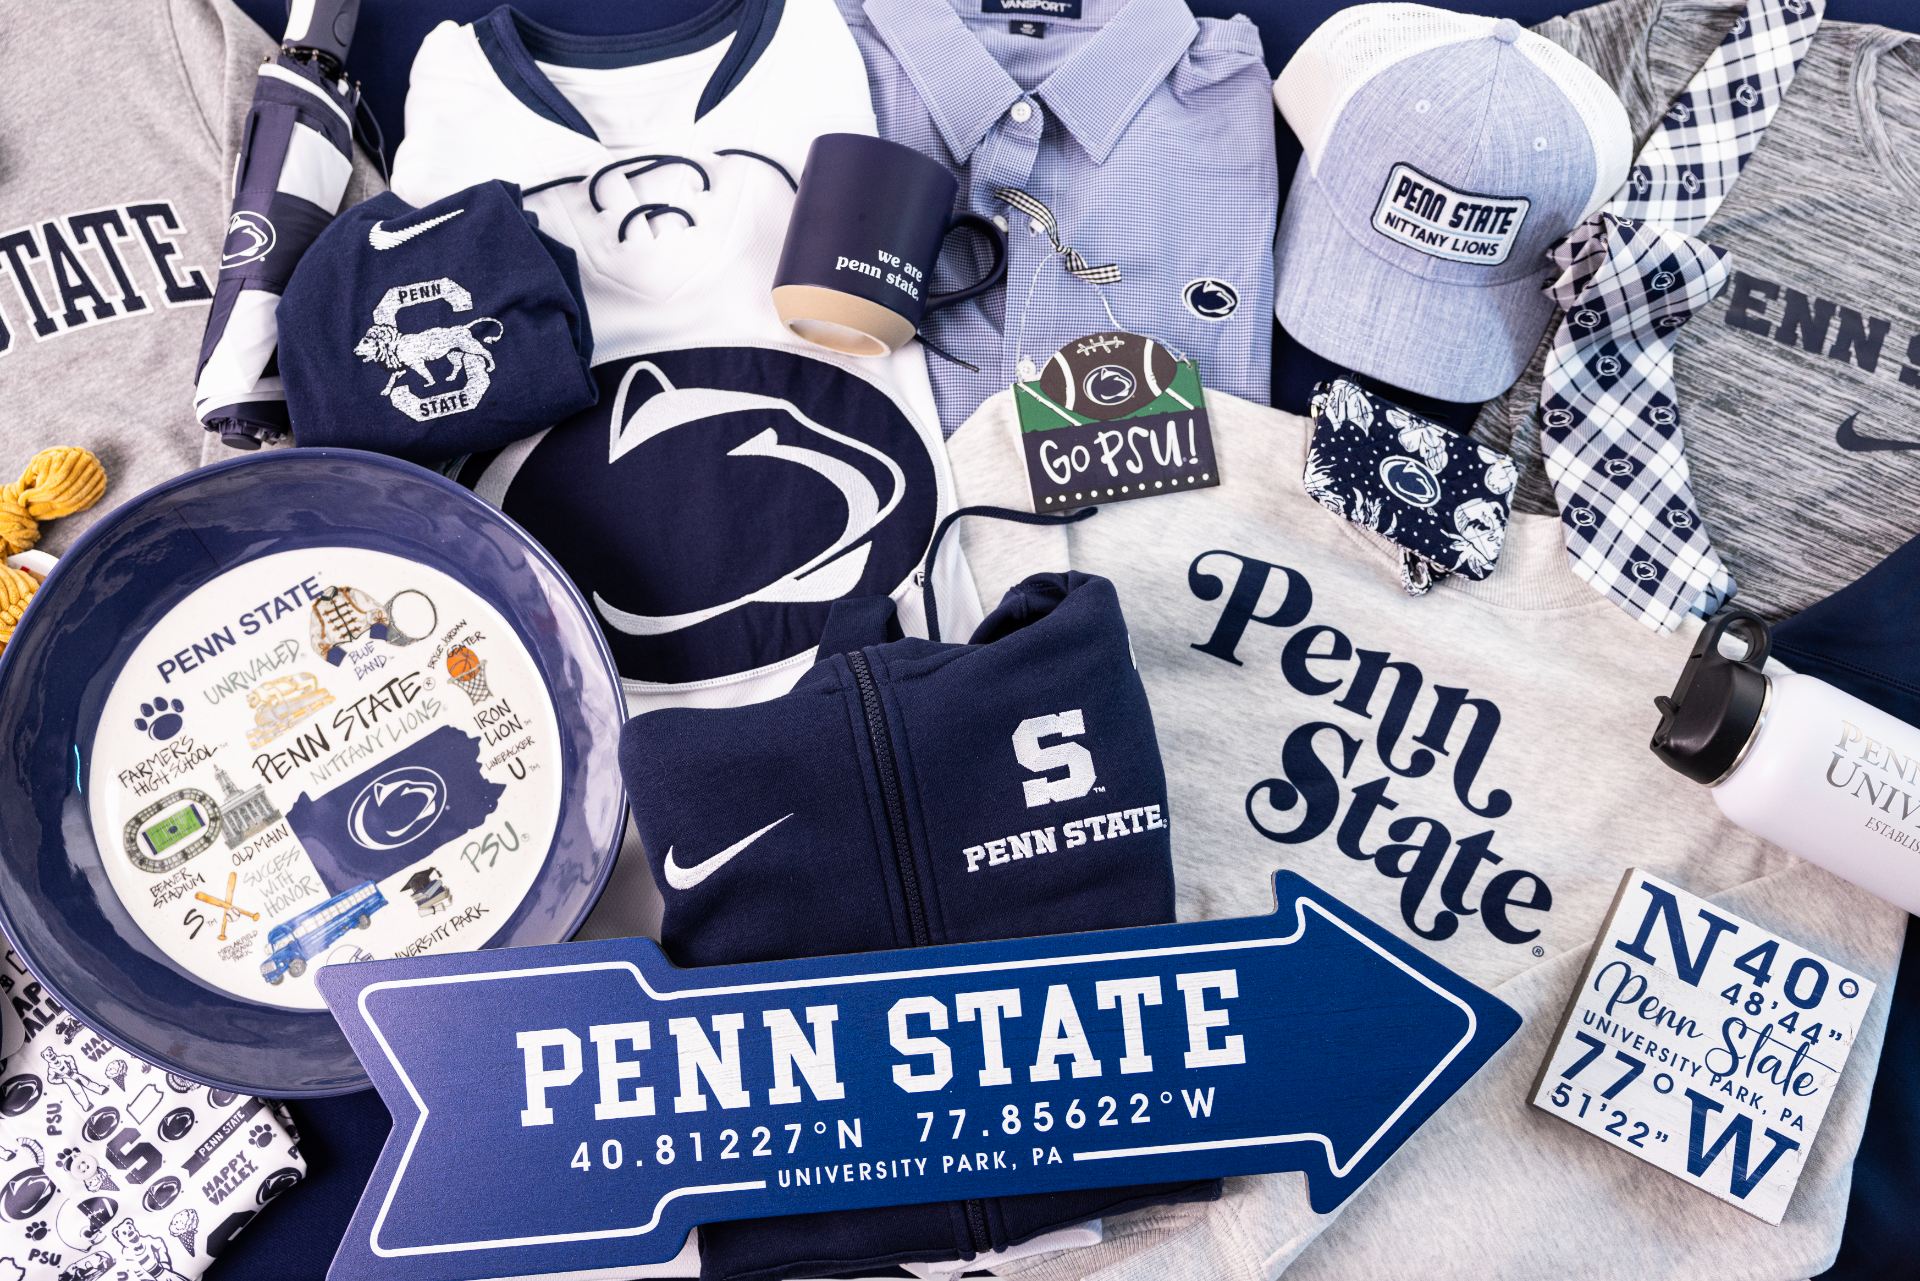 Grouping of Penn State licensed products including shirts, a hat, a sign, and a plate